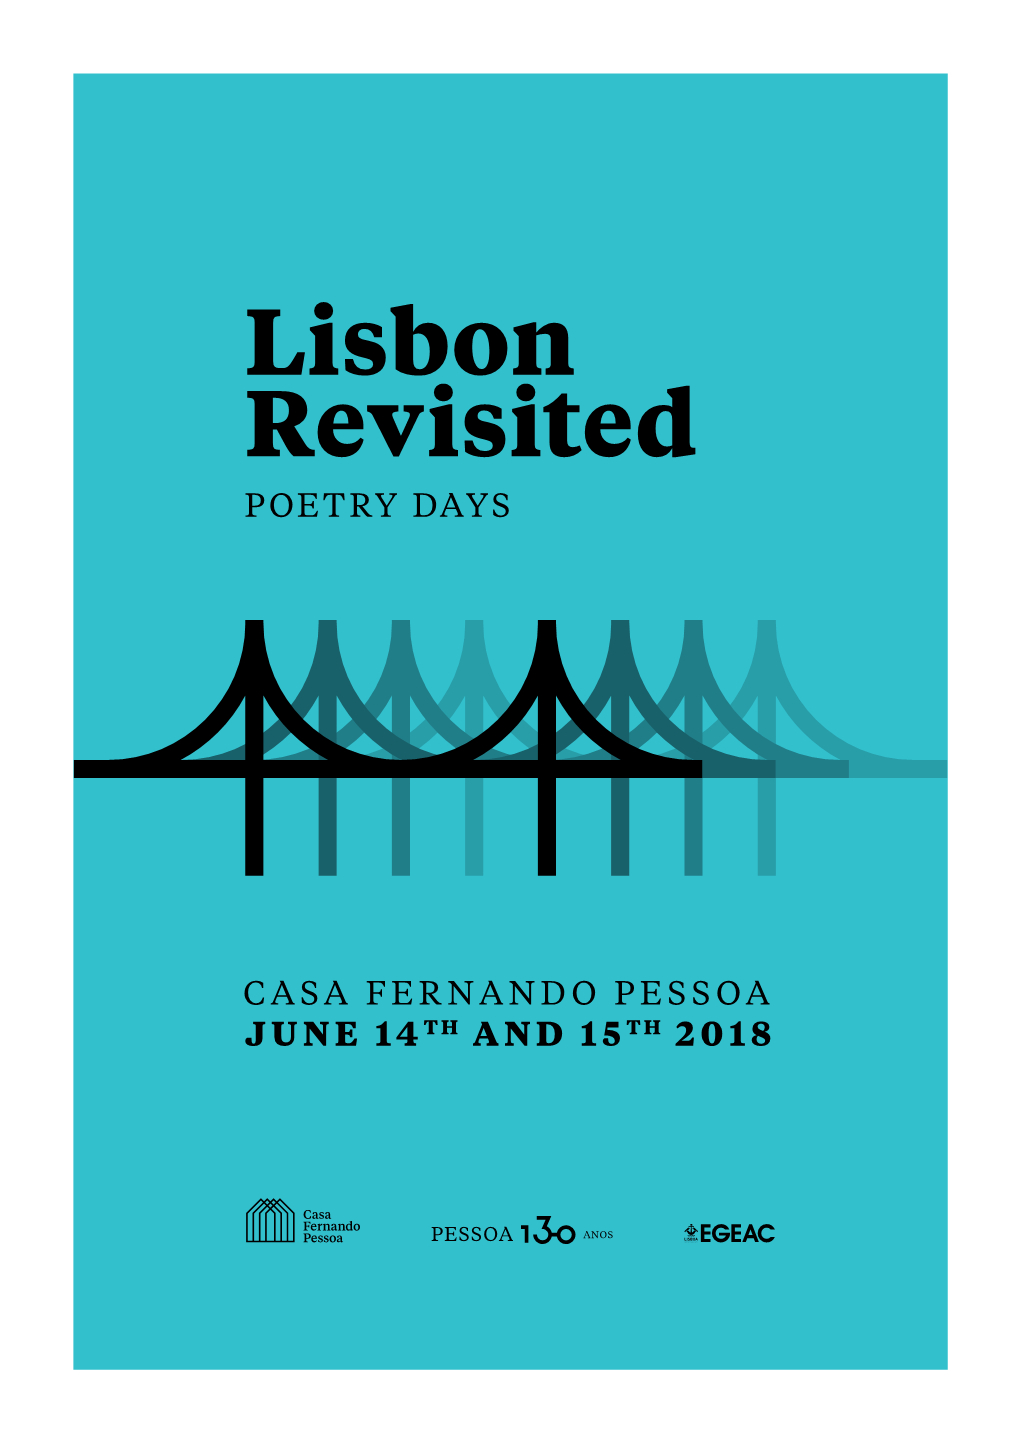 Lisbon Revisited POETRY DAYS